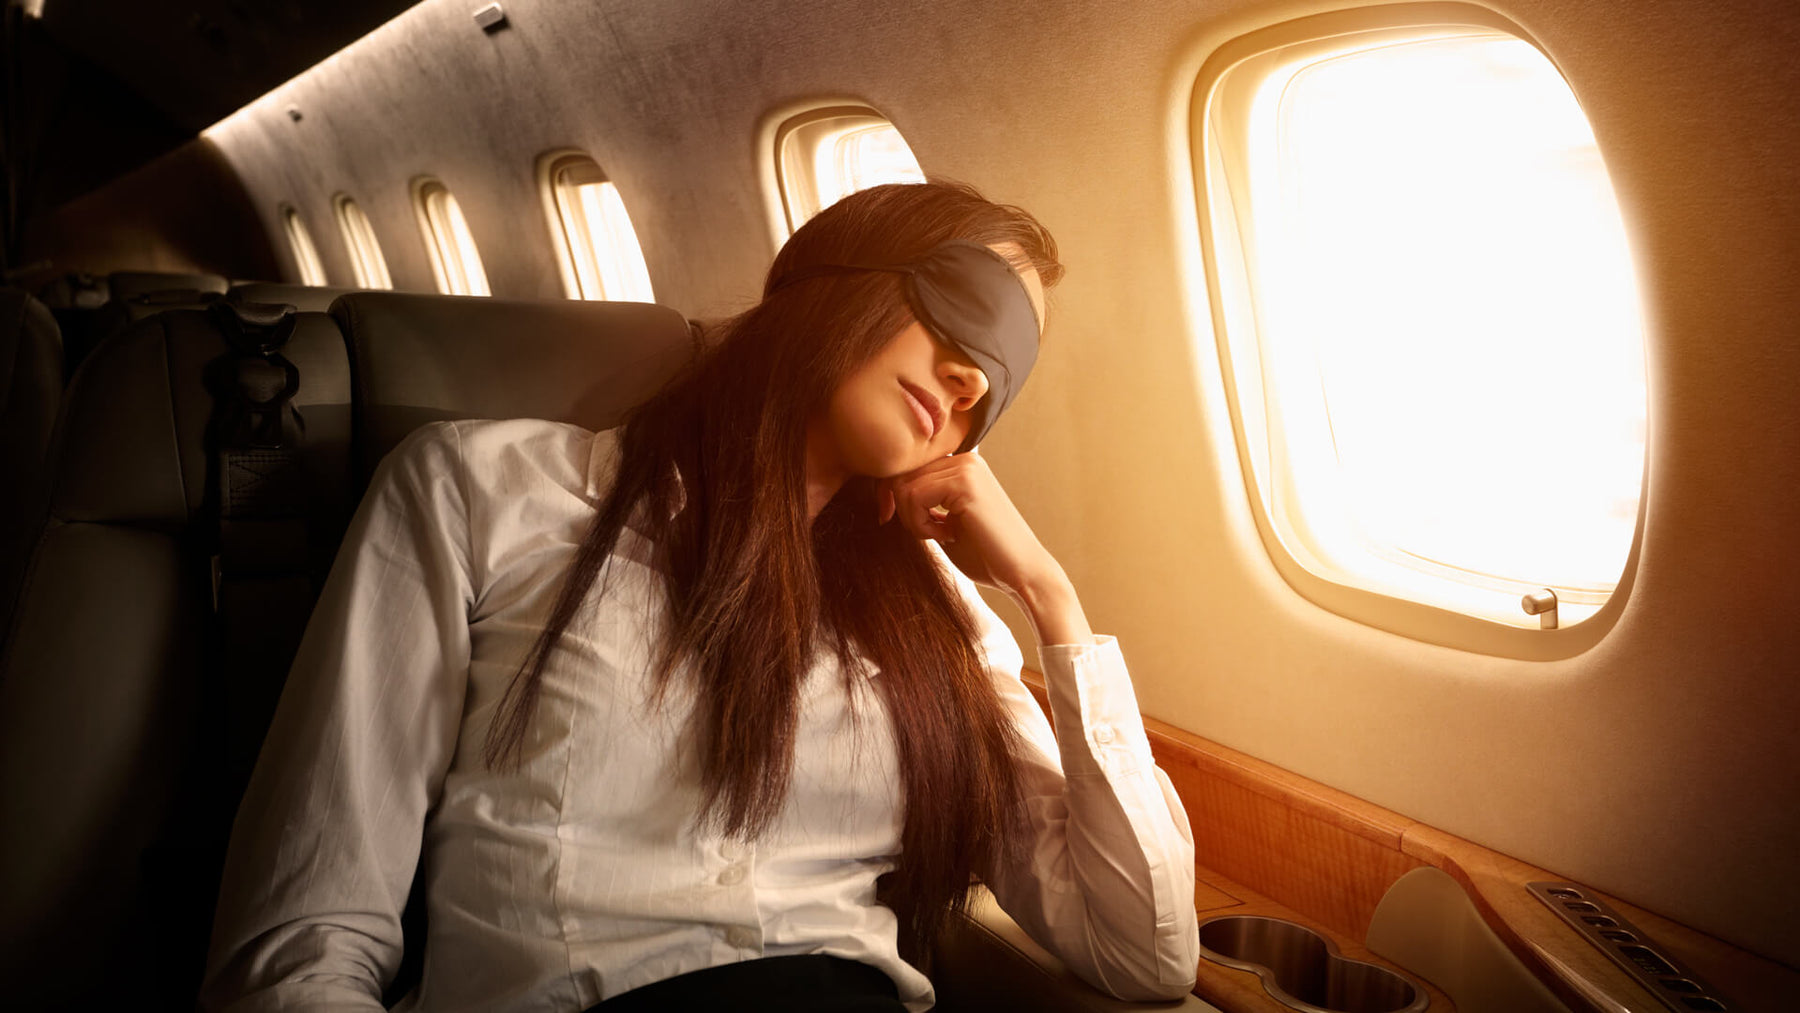 The Best Sleep Aids for Travel